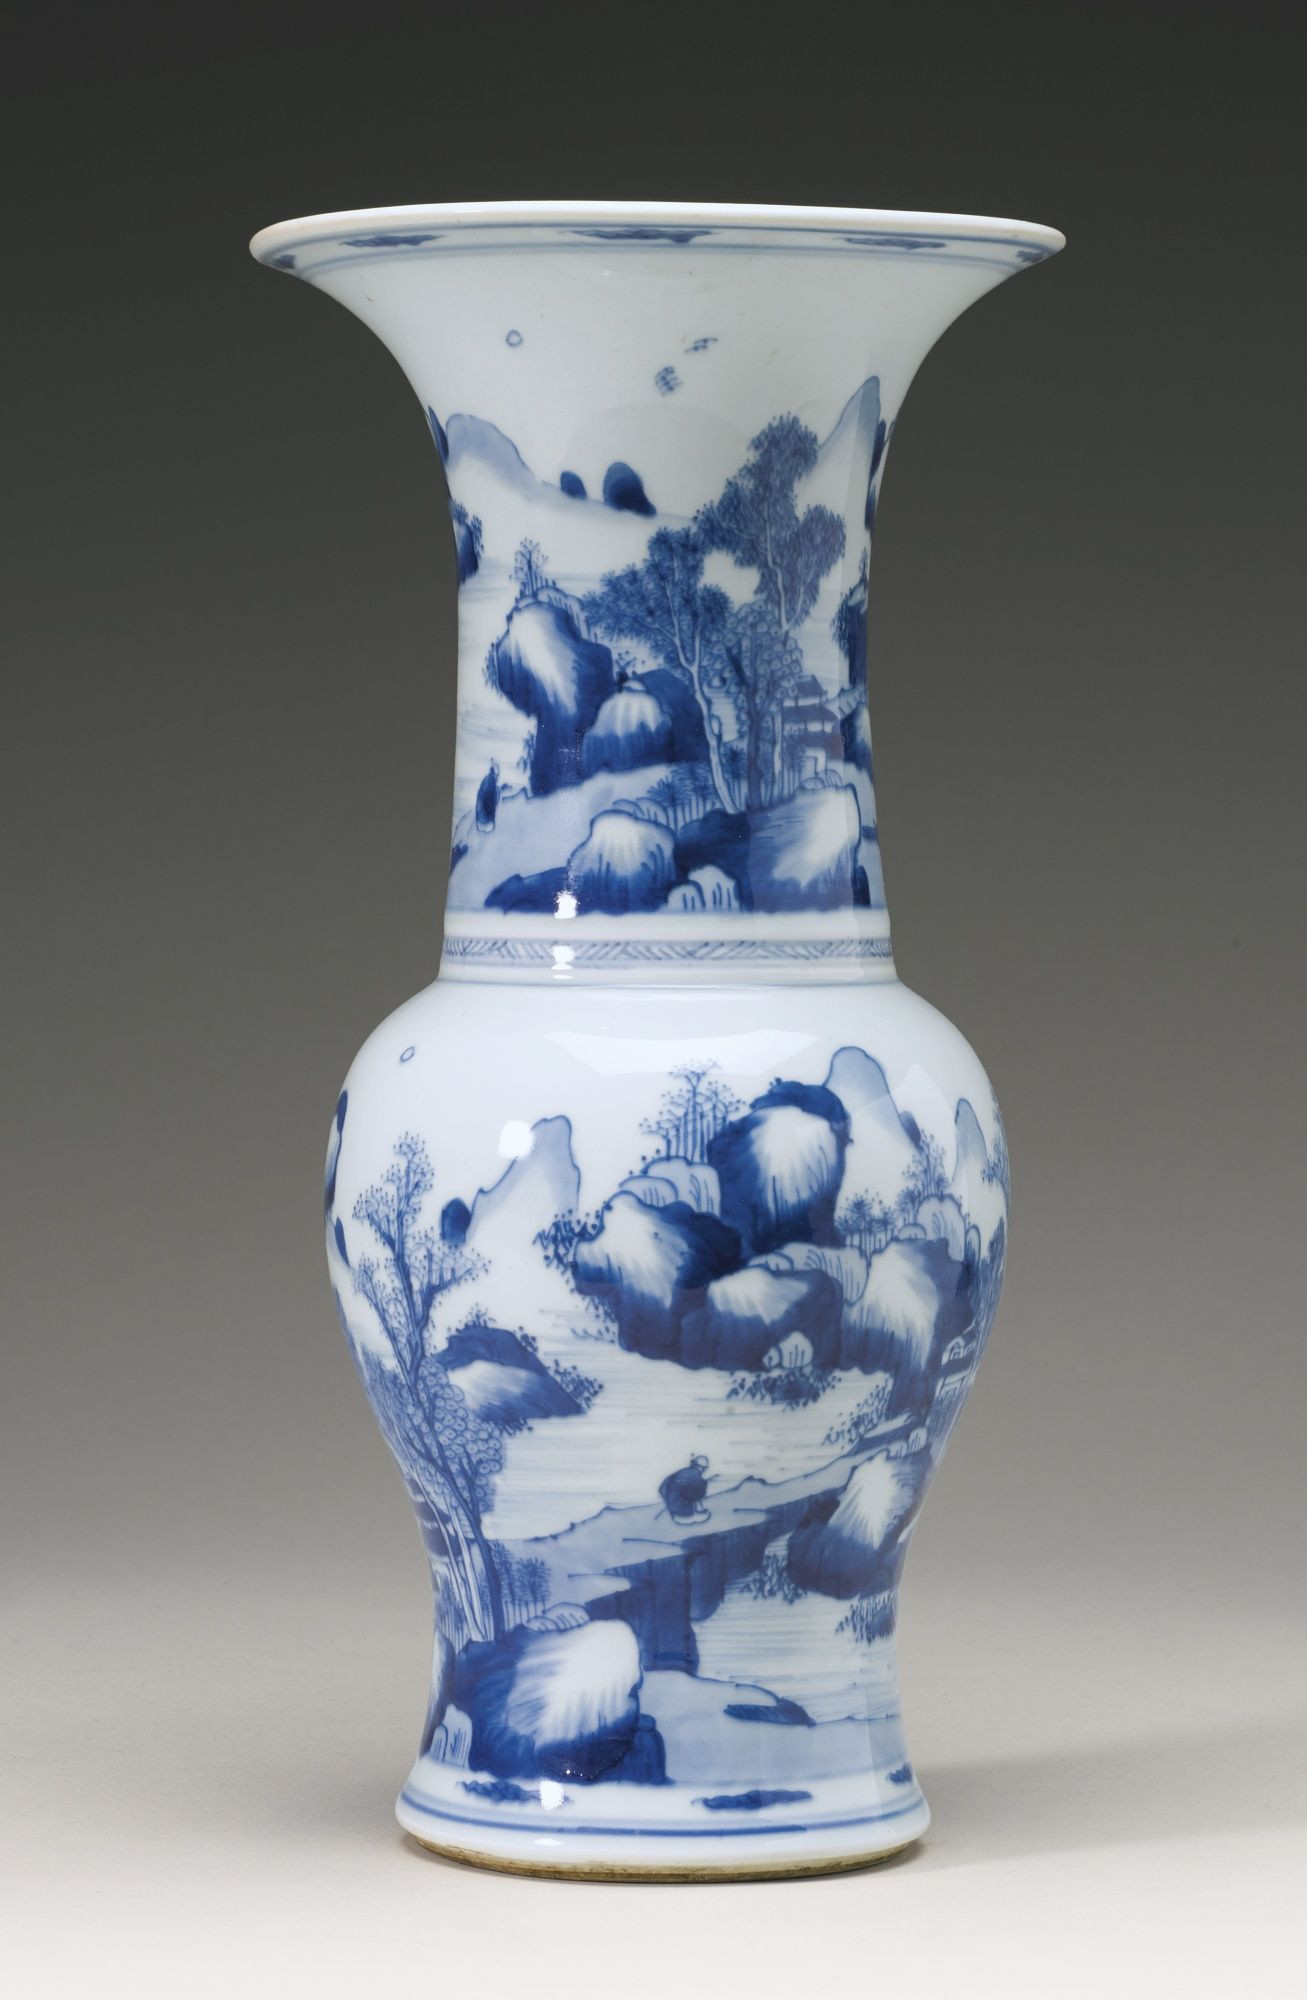 27 Recommended Chinese Meiping Vase 2024 free download chinese meiping vase of image result for antique chinese vase hurricanevasesdecor with a blue and white landscape yenyen vaseqing dynasty 19th